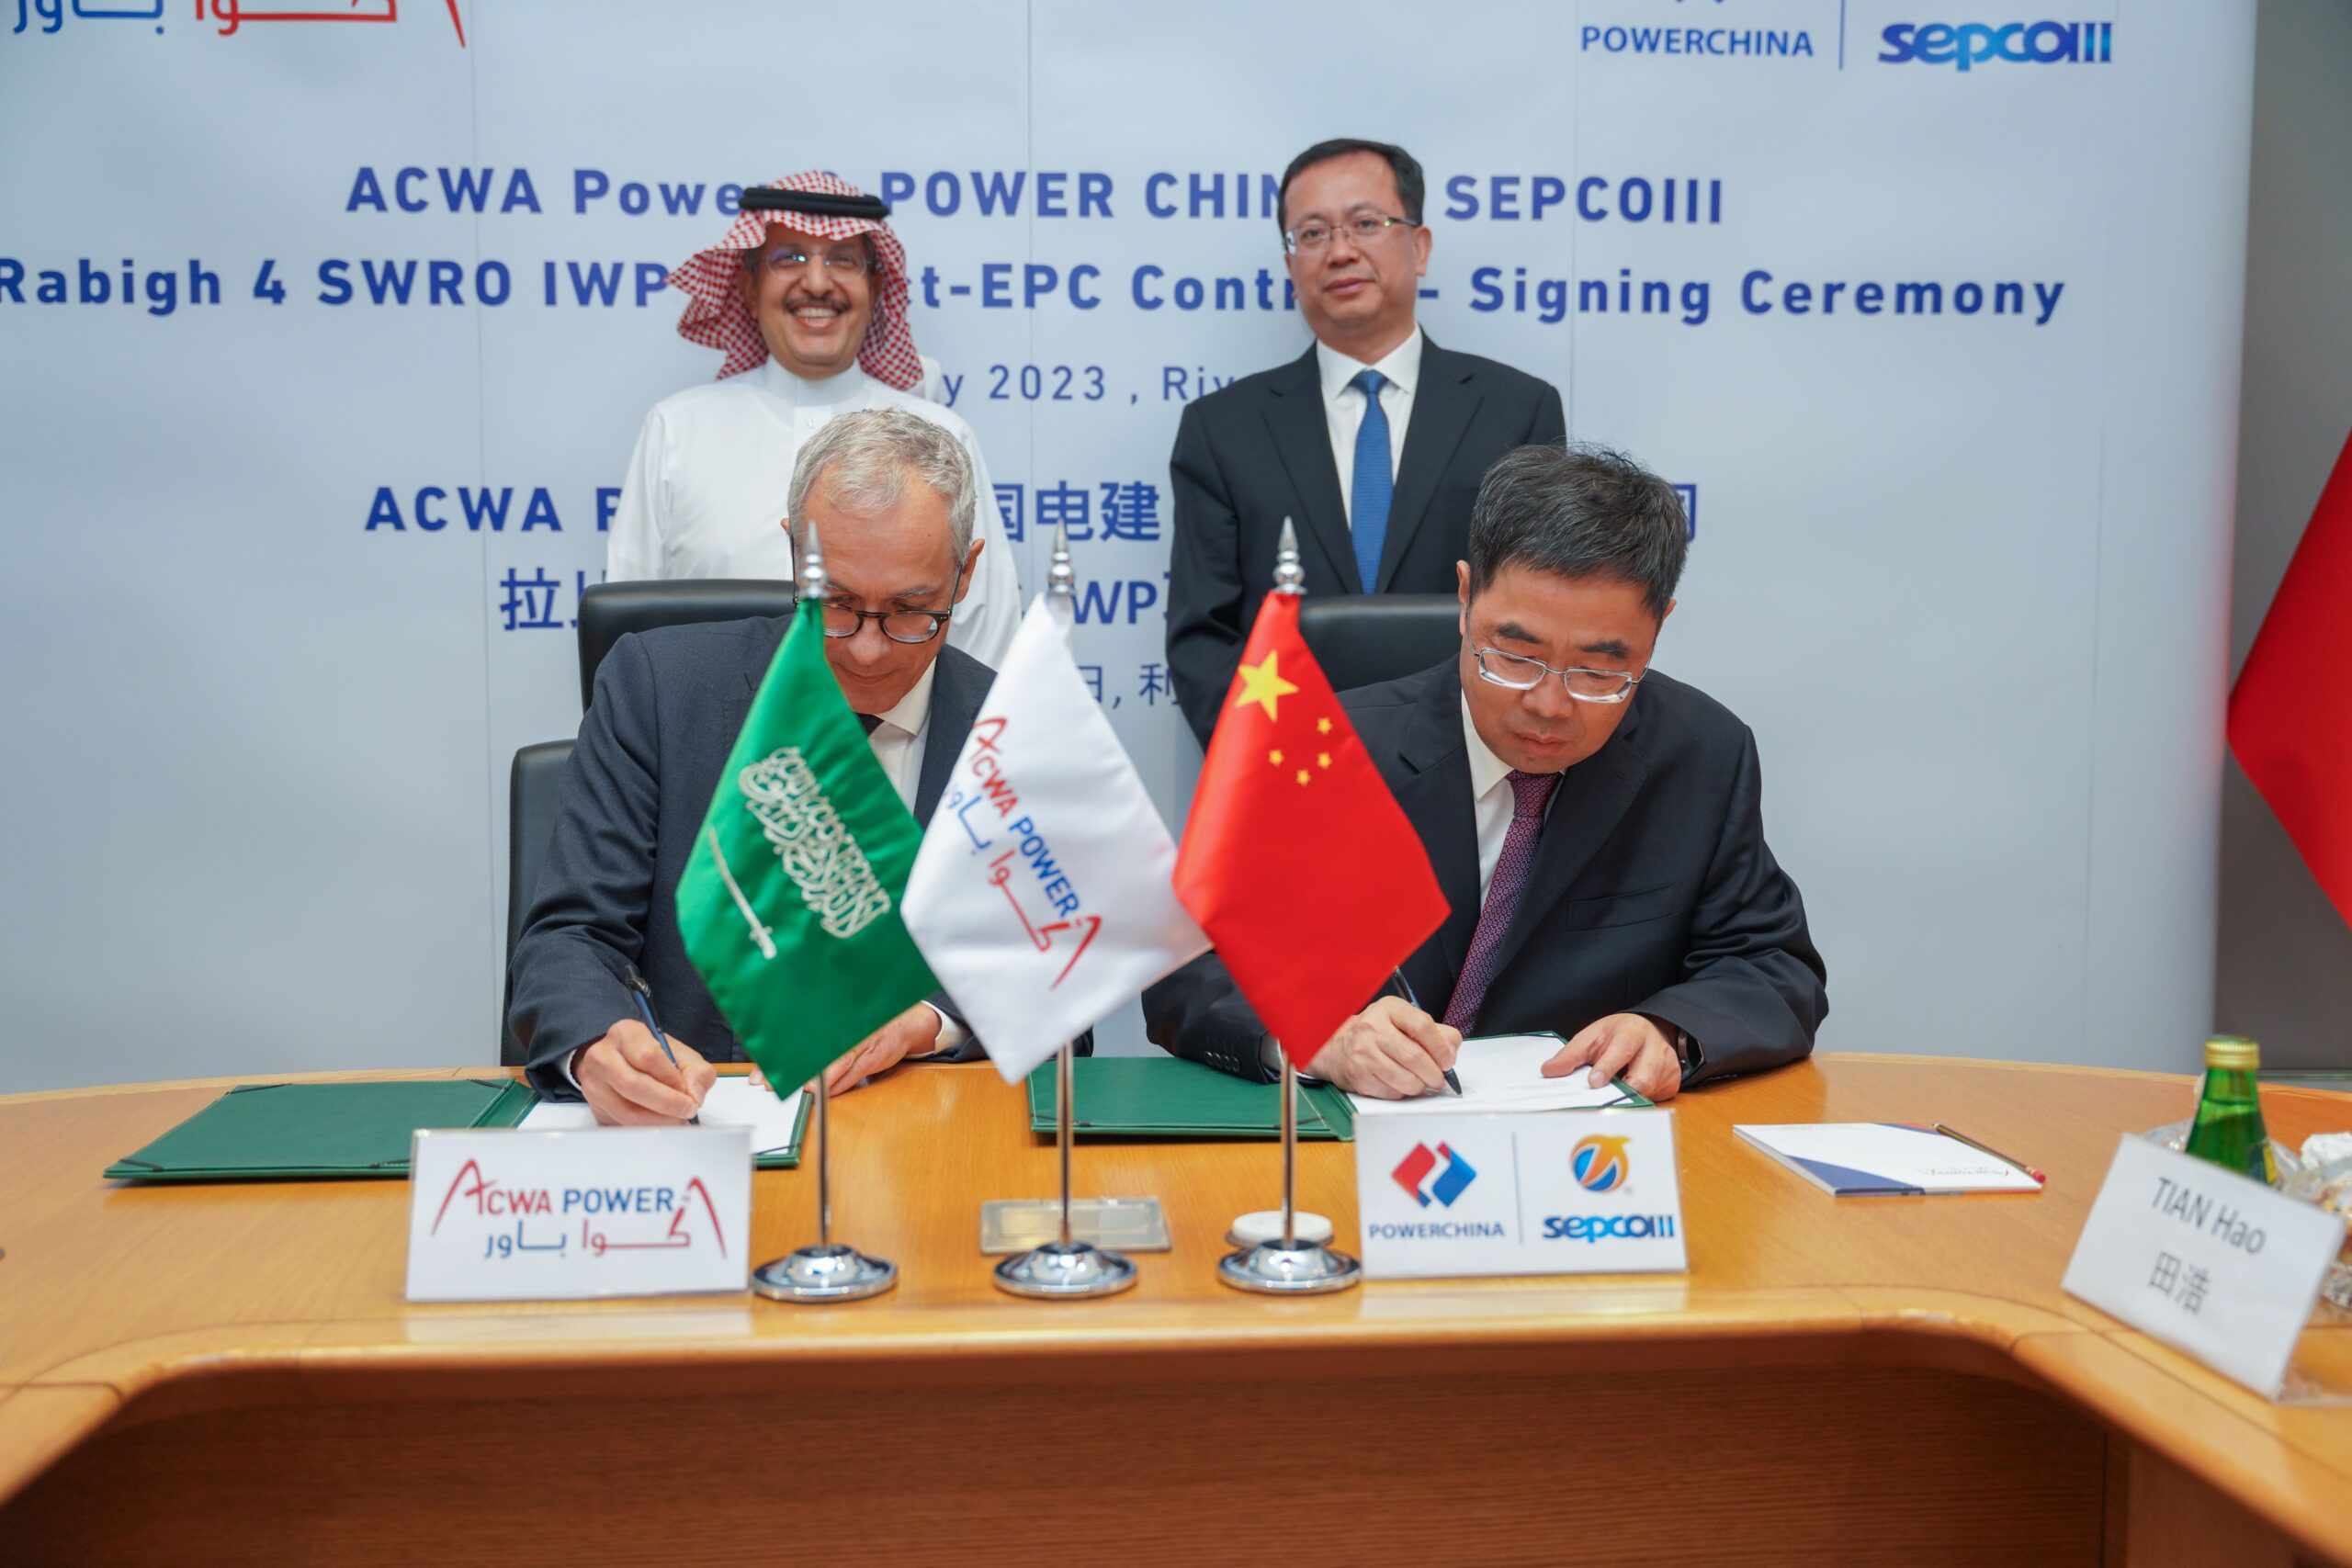 project,power,contract,acwa,desalination